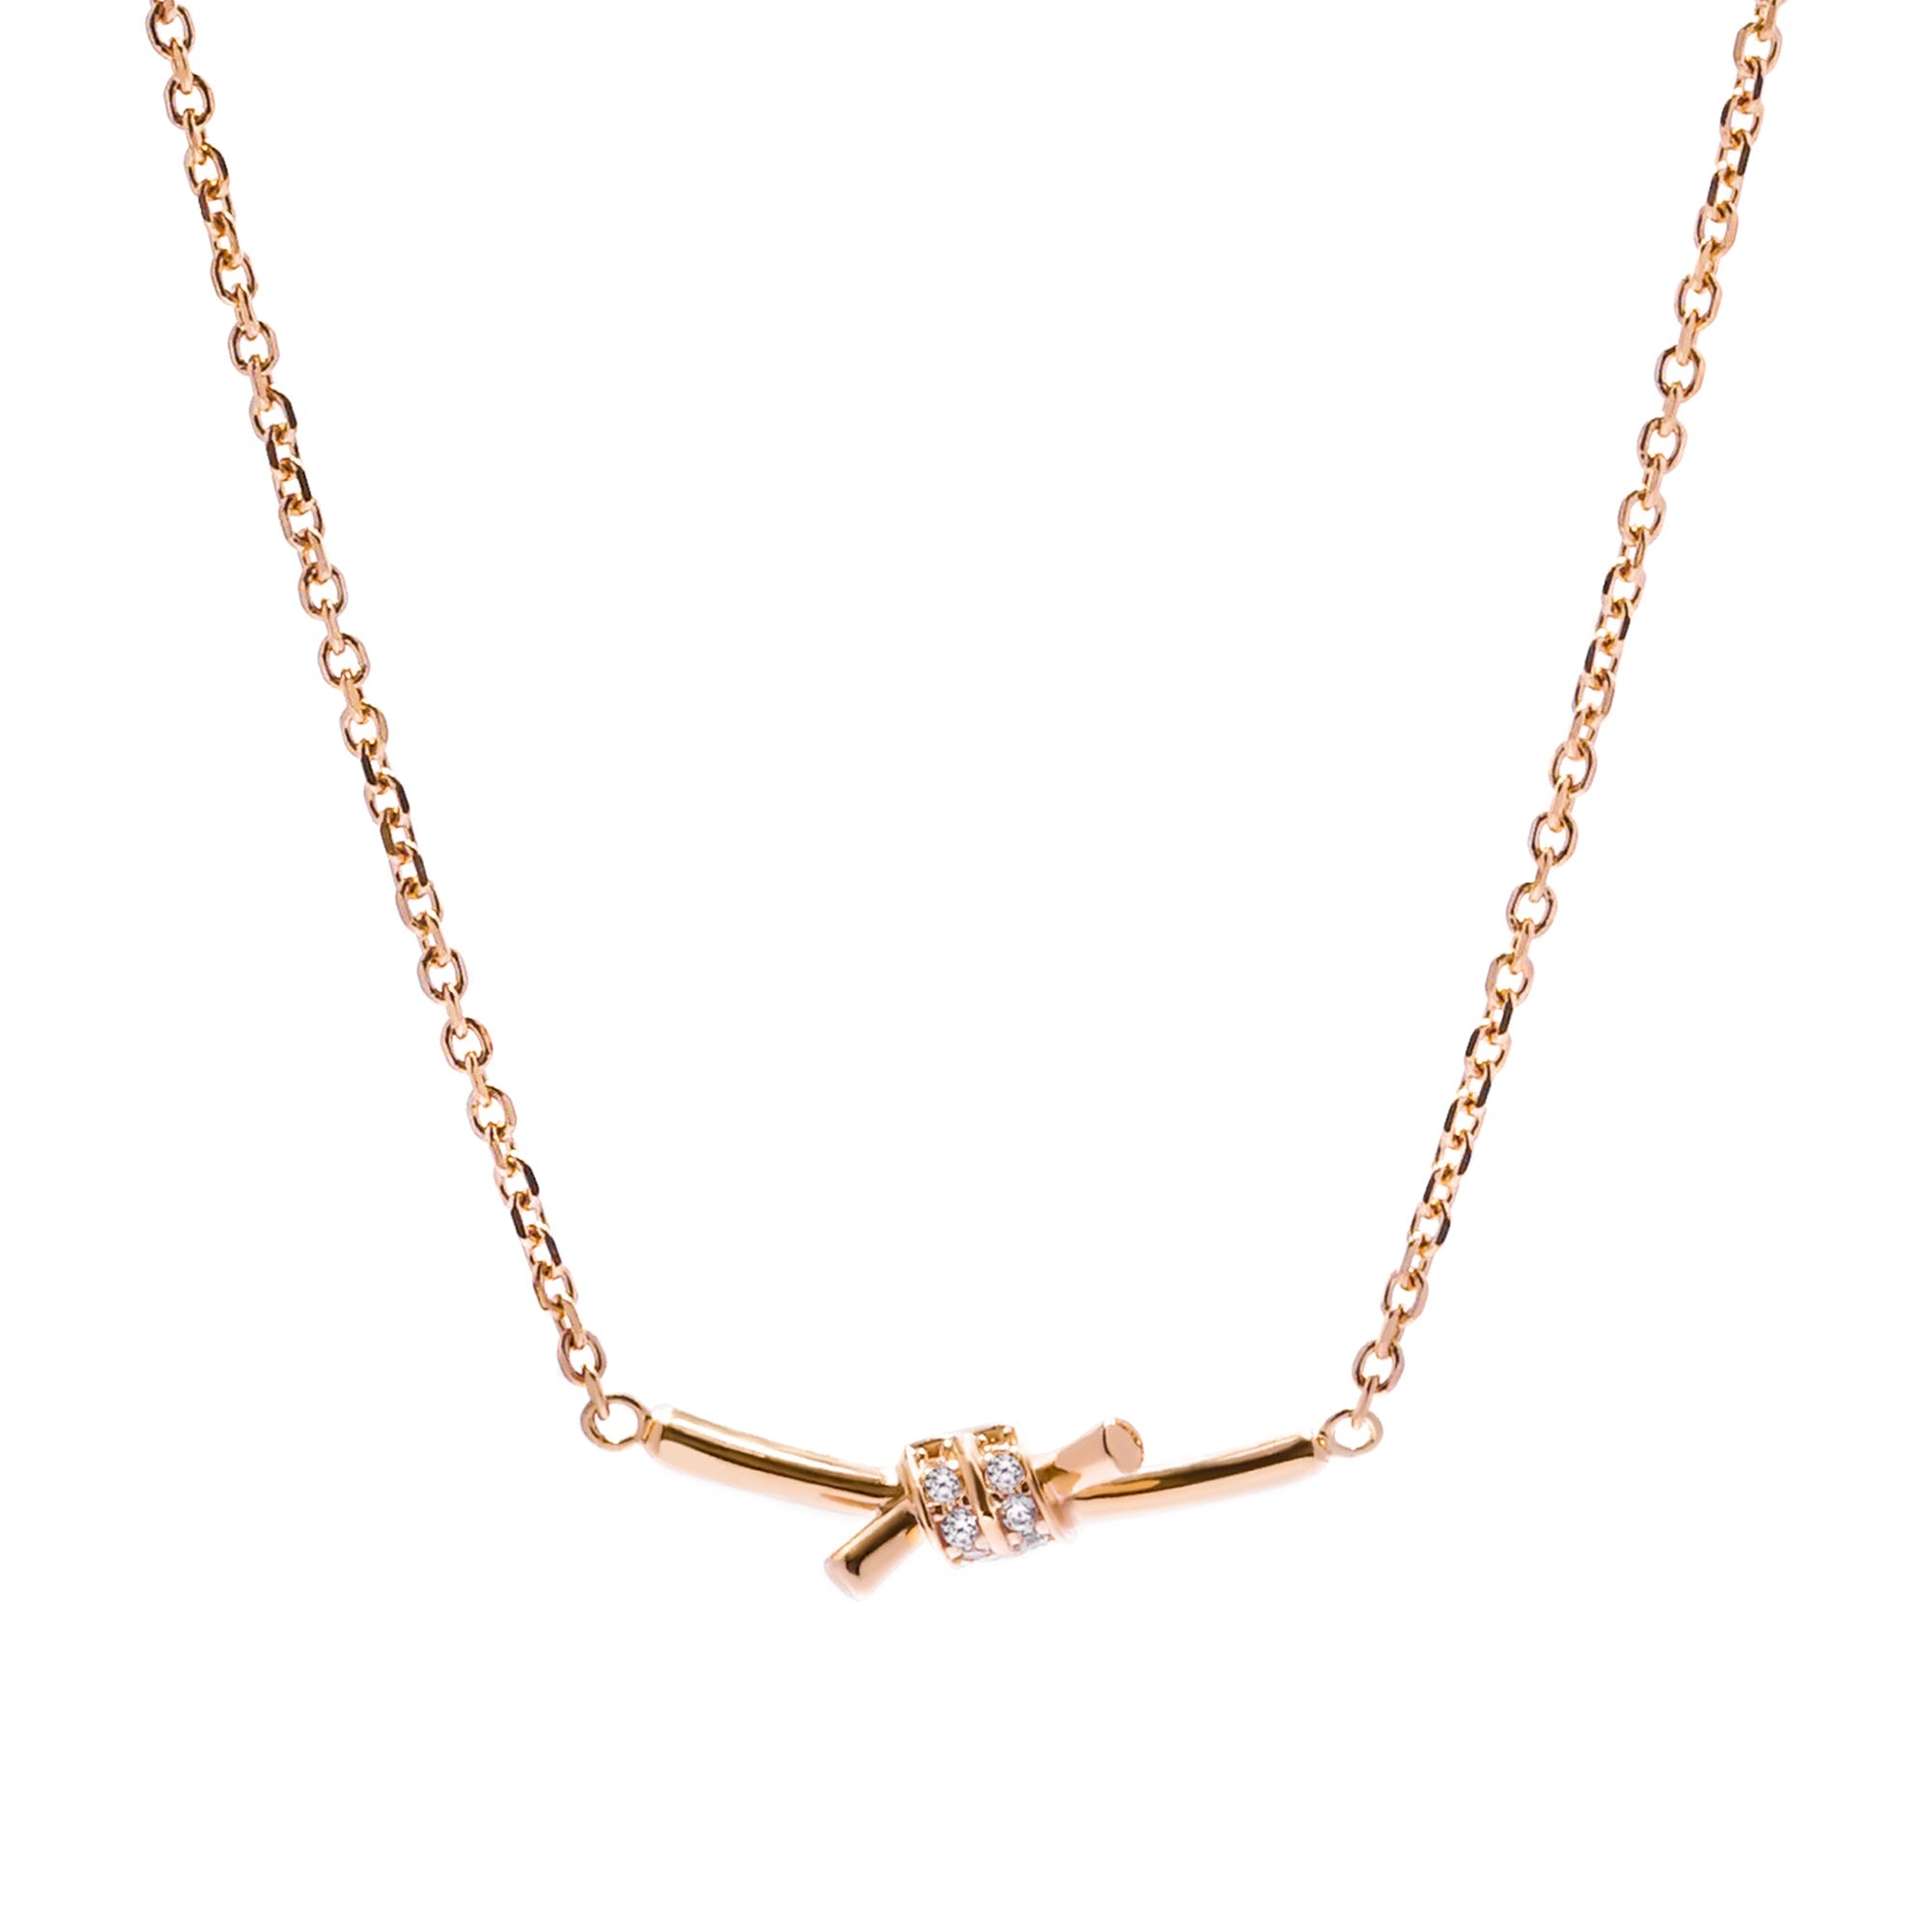 Lavita Gold Necklace - Twine Collection - Juene Jewelry